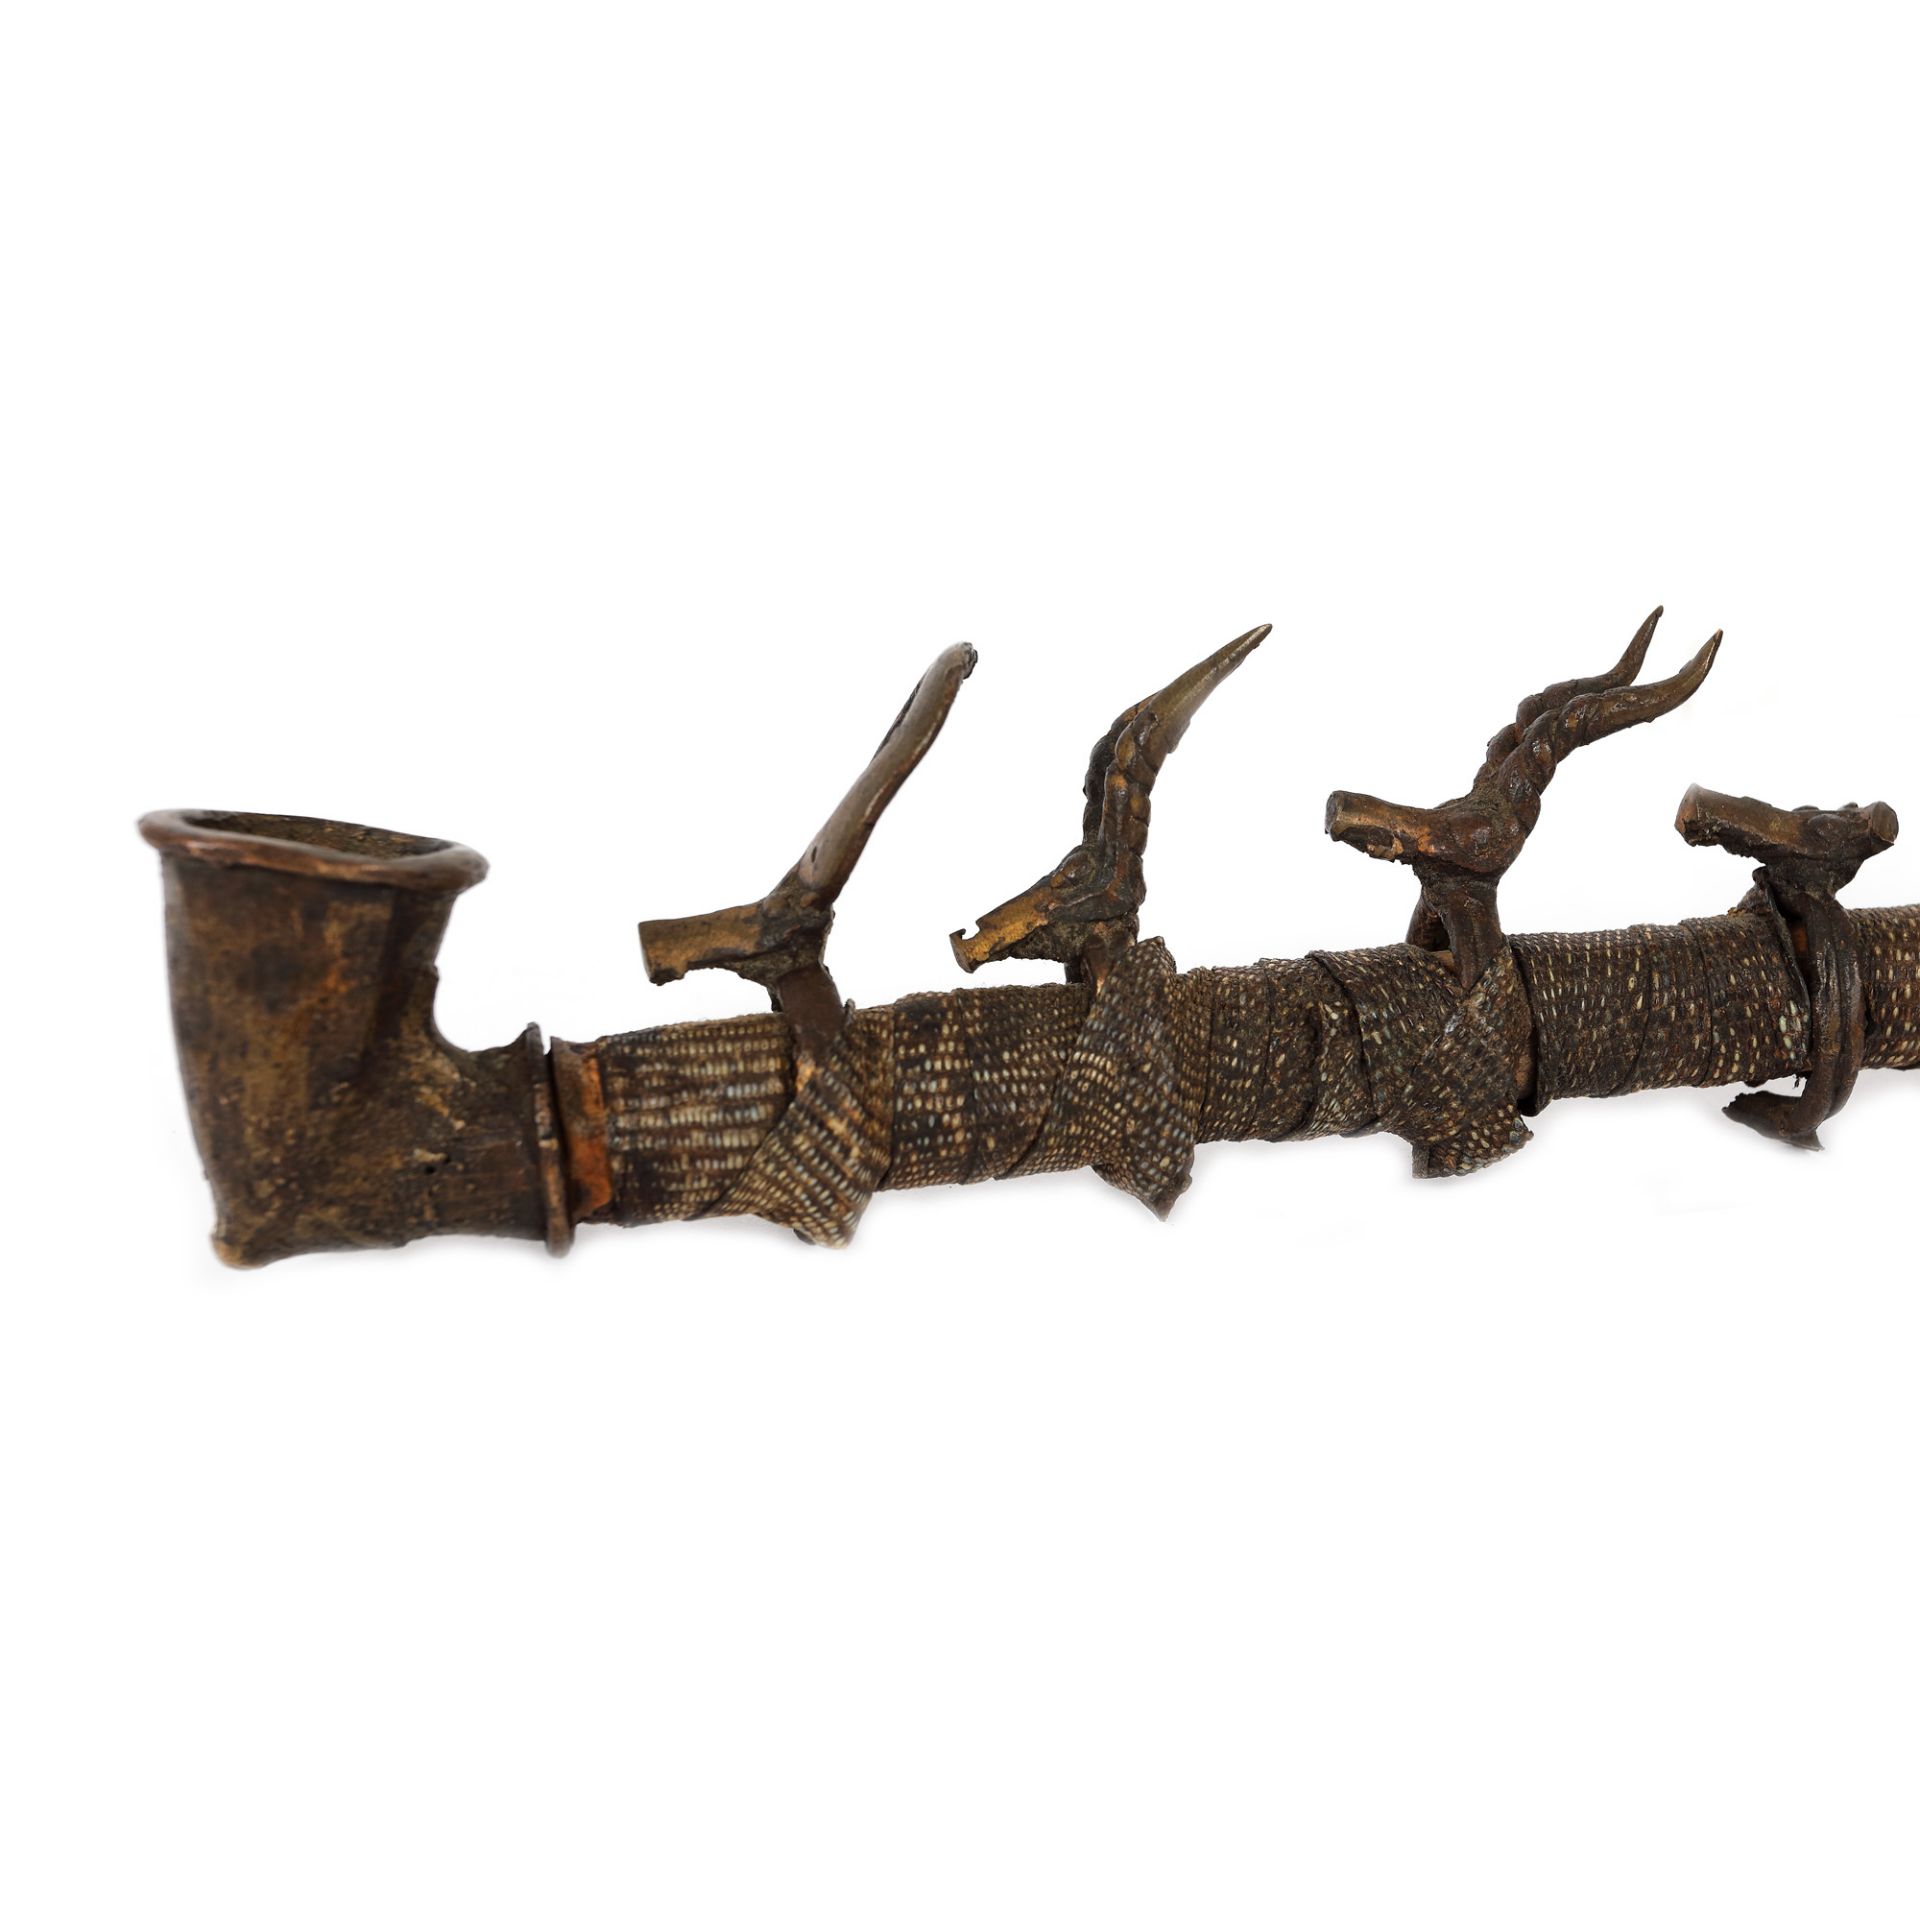 Tribal bronze pipe, Cameroon, middle 20th century - Image 2 of 3